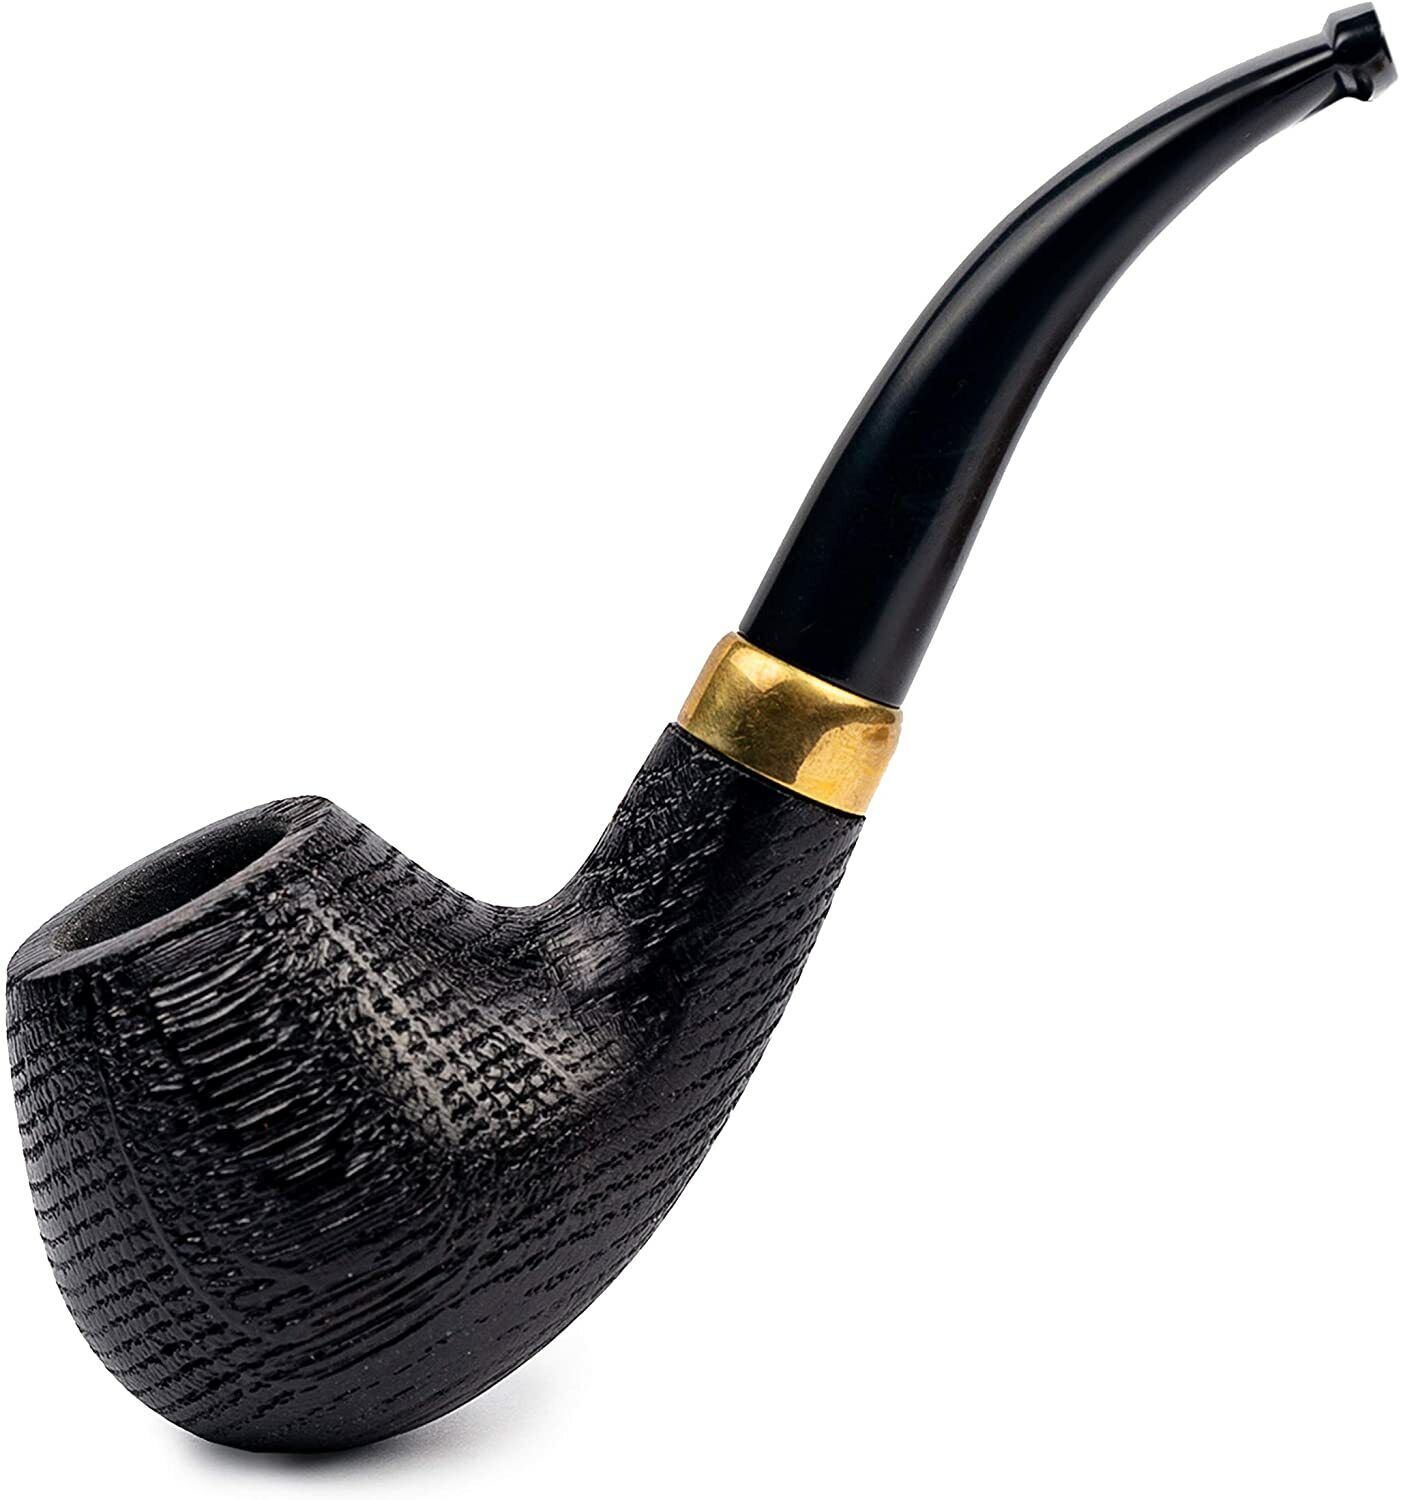 Dr. Watson - Tobacco Smoking Pipe, Classic Bent Apple shape (Rusticated)